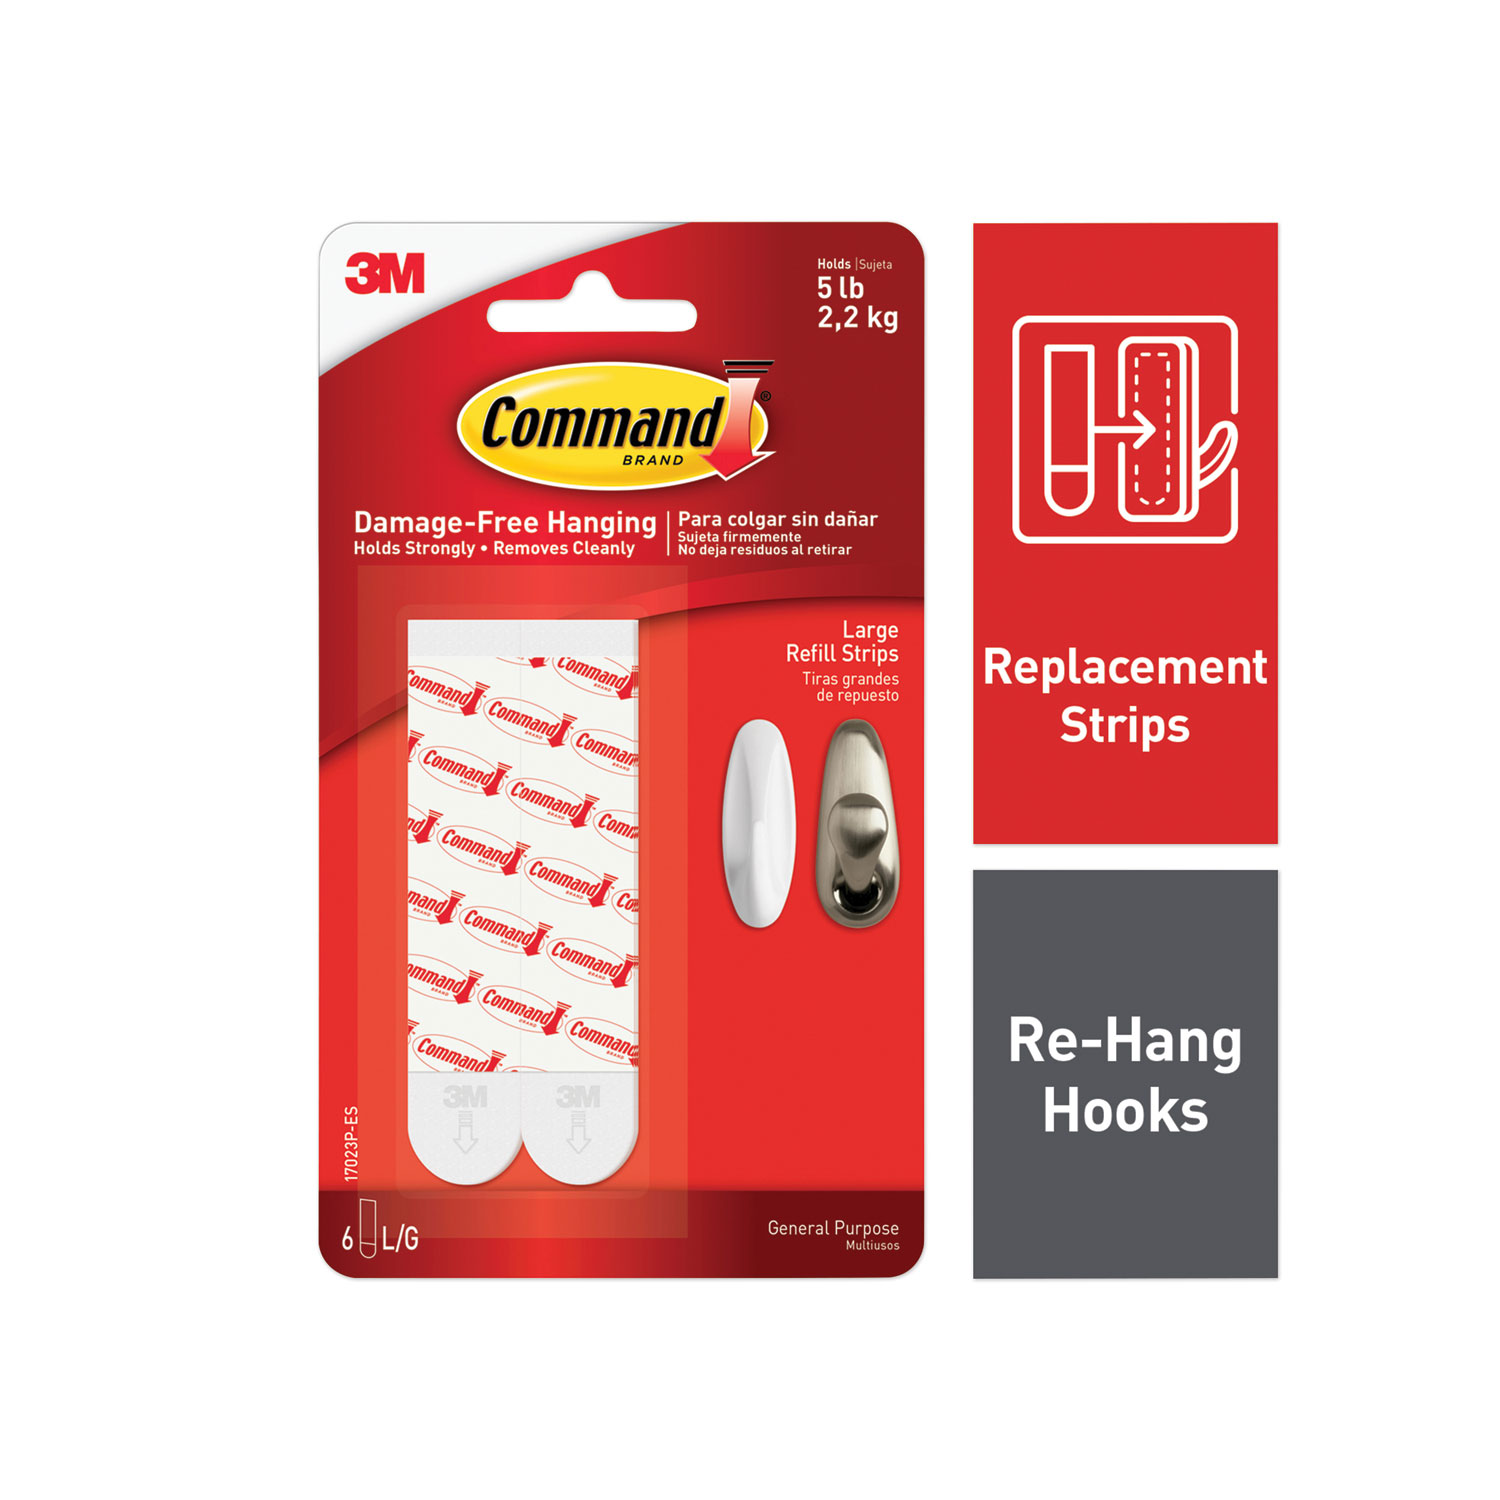  Command 17023P-ES Refill Strips, Removable, Holds up to 5 lbs, 0.75 x 3.65, White, 6/Pack (MMM70006903176) 